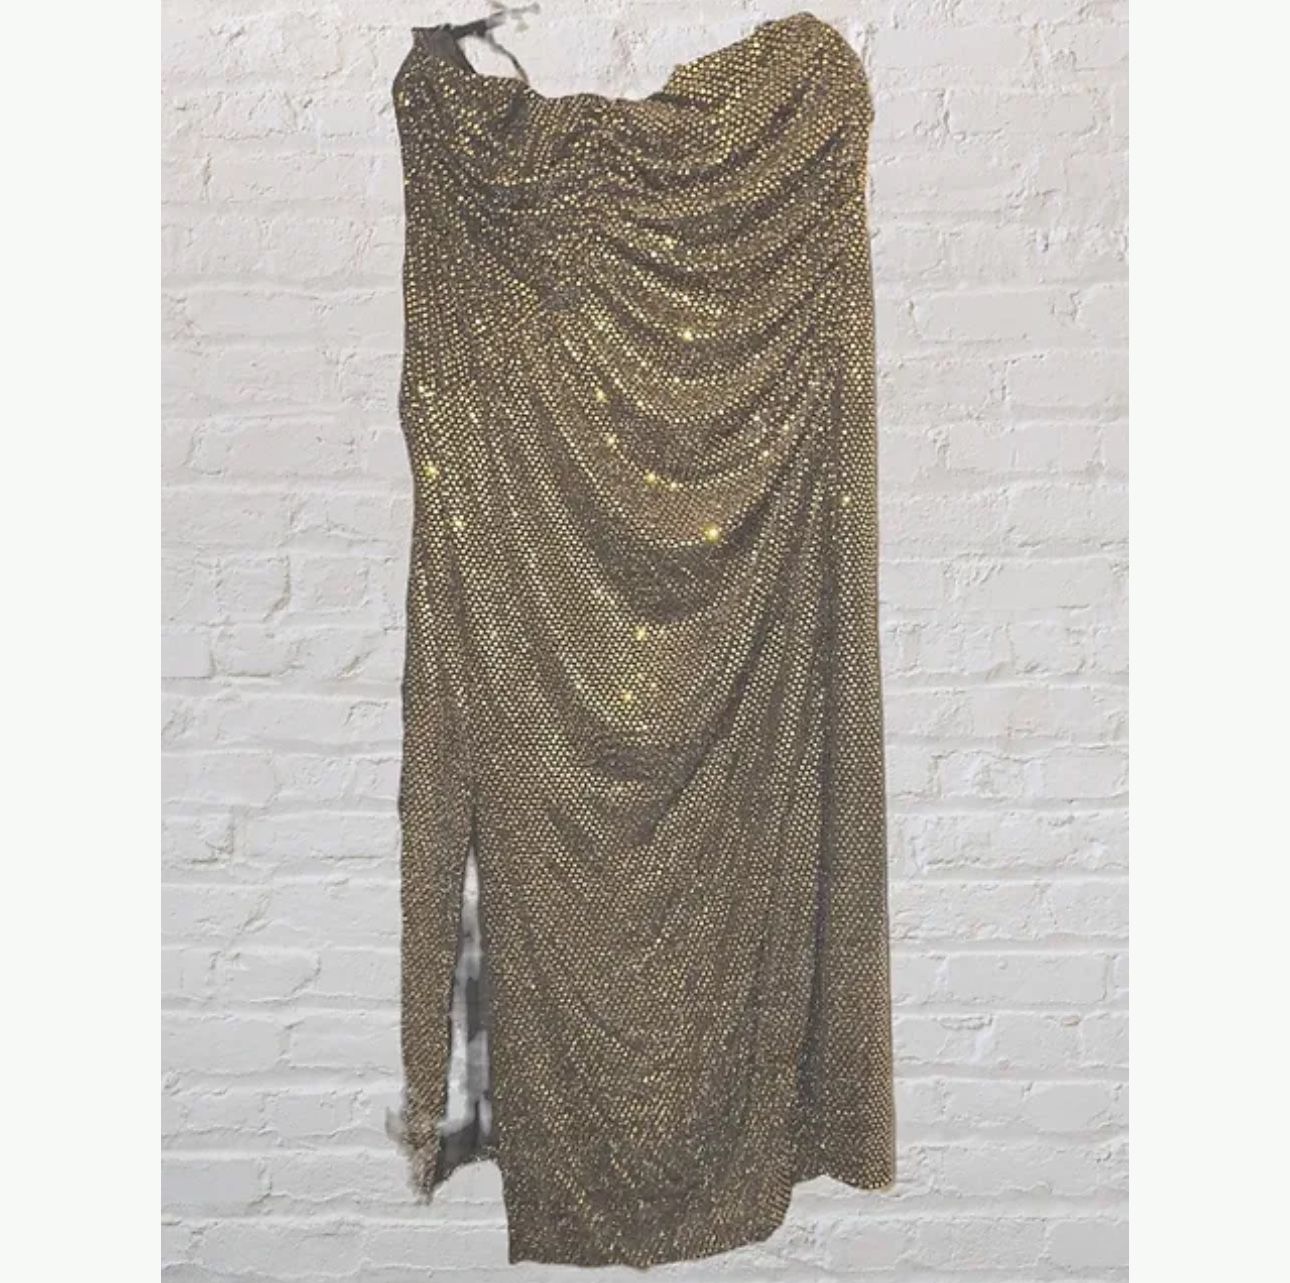 Brand New (Size 2XL) Grace Karin Gold Tube Top Sequins Dress